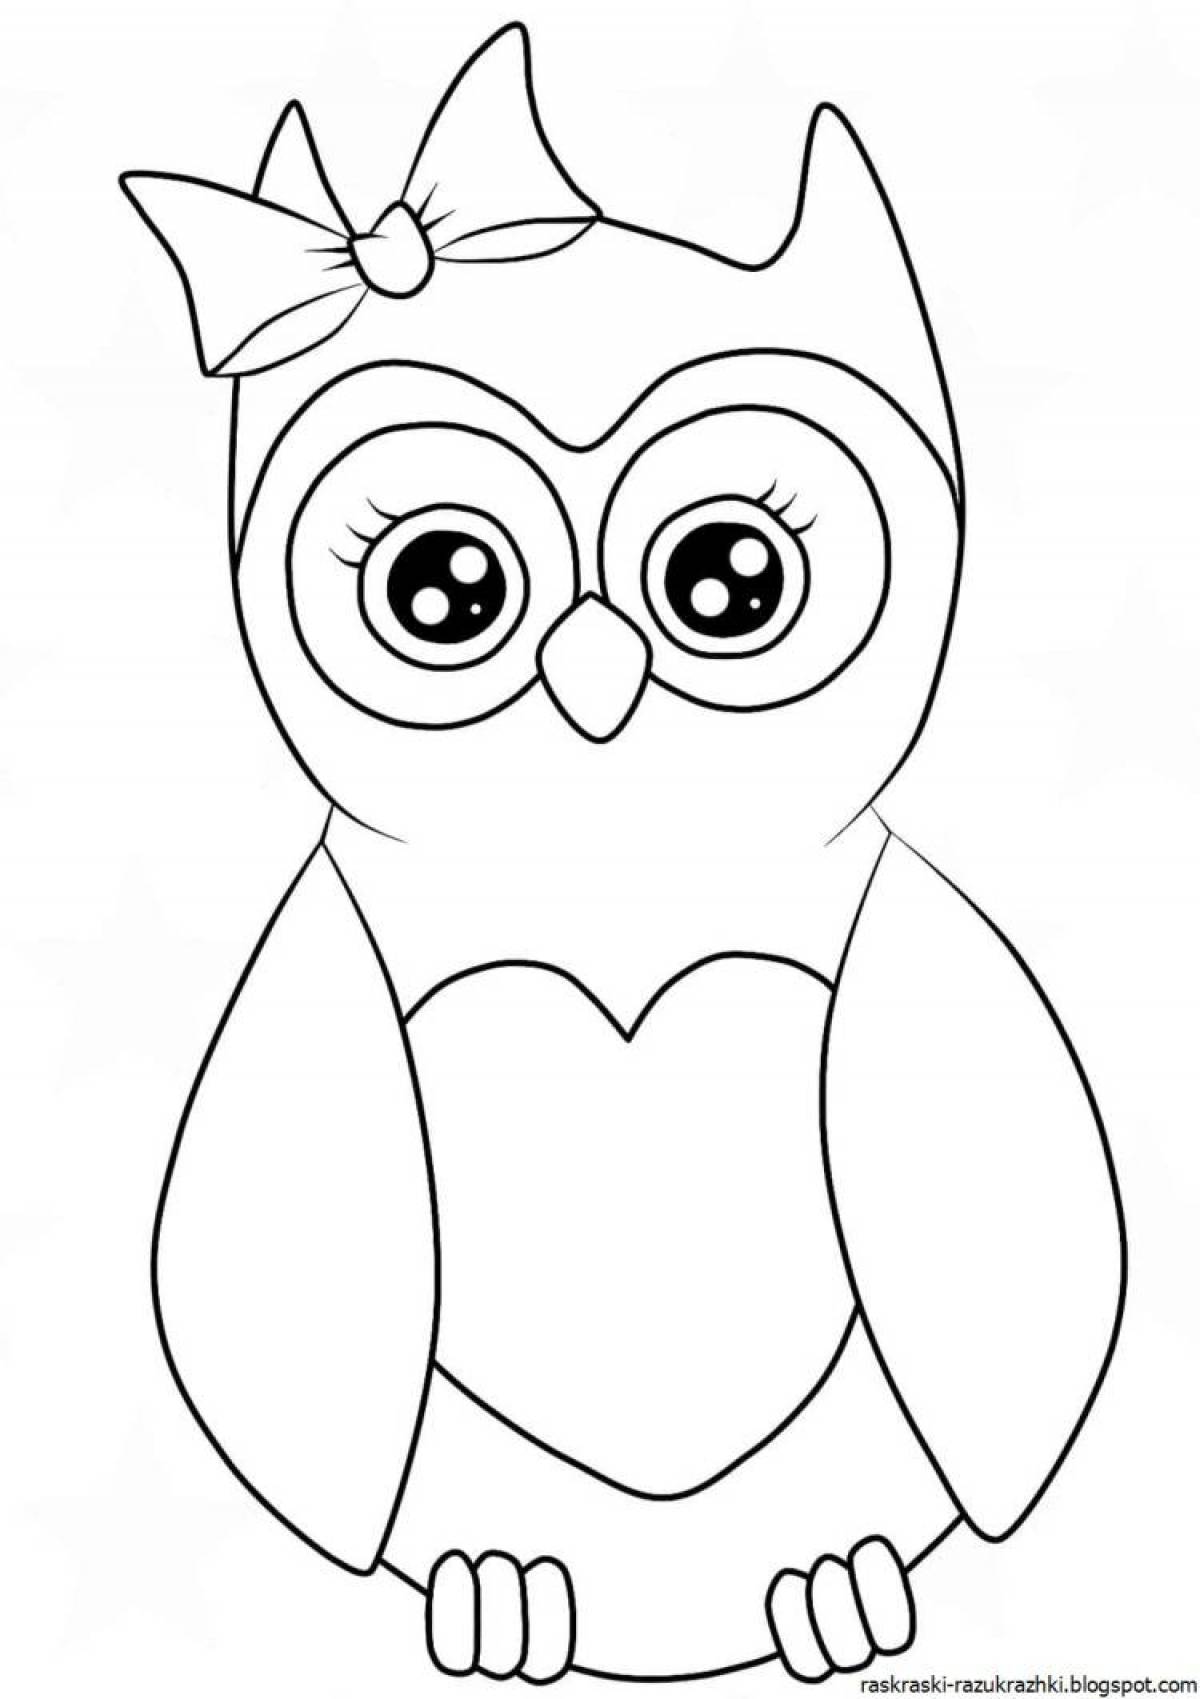 Shiny owl coloring book